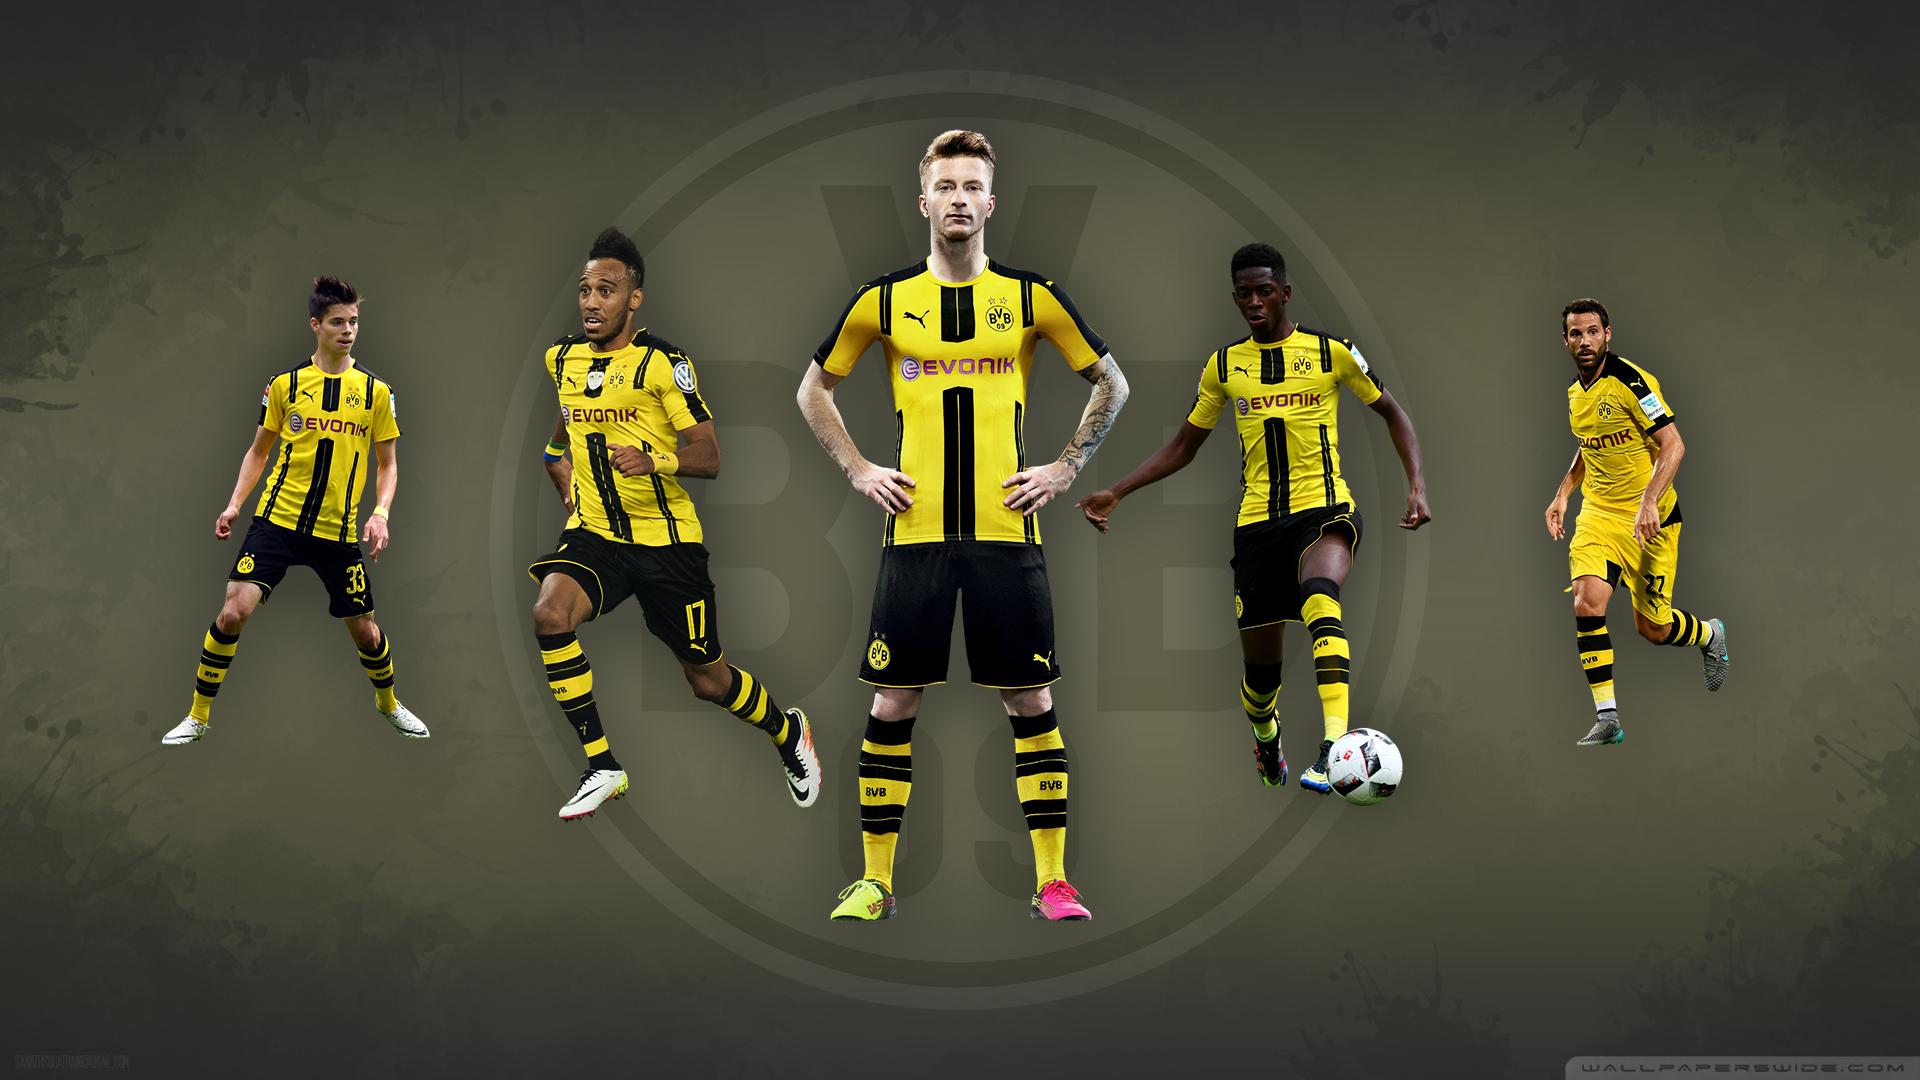 Wallpaper With Some Of My Fav Players - Bvb Wallpaper Players - HD Wallpaper 